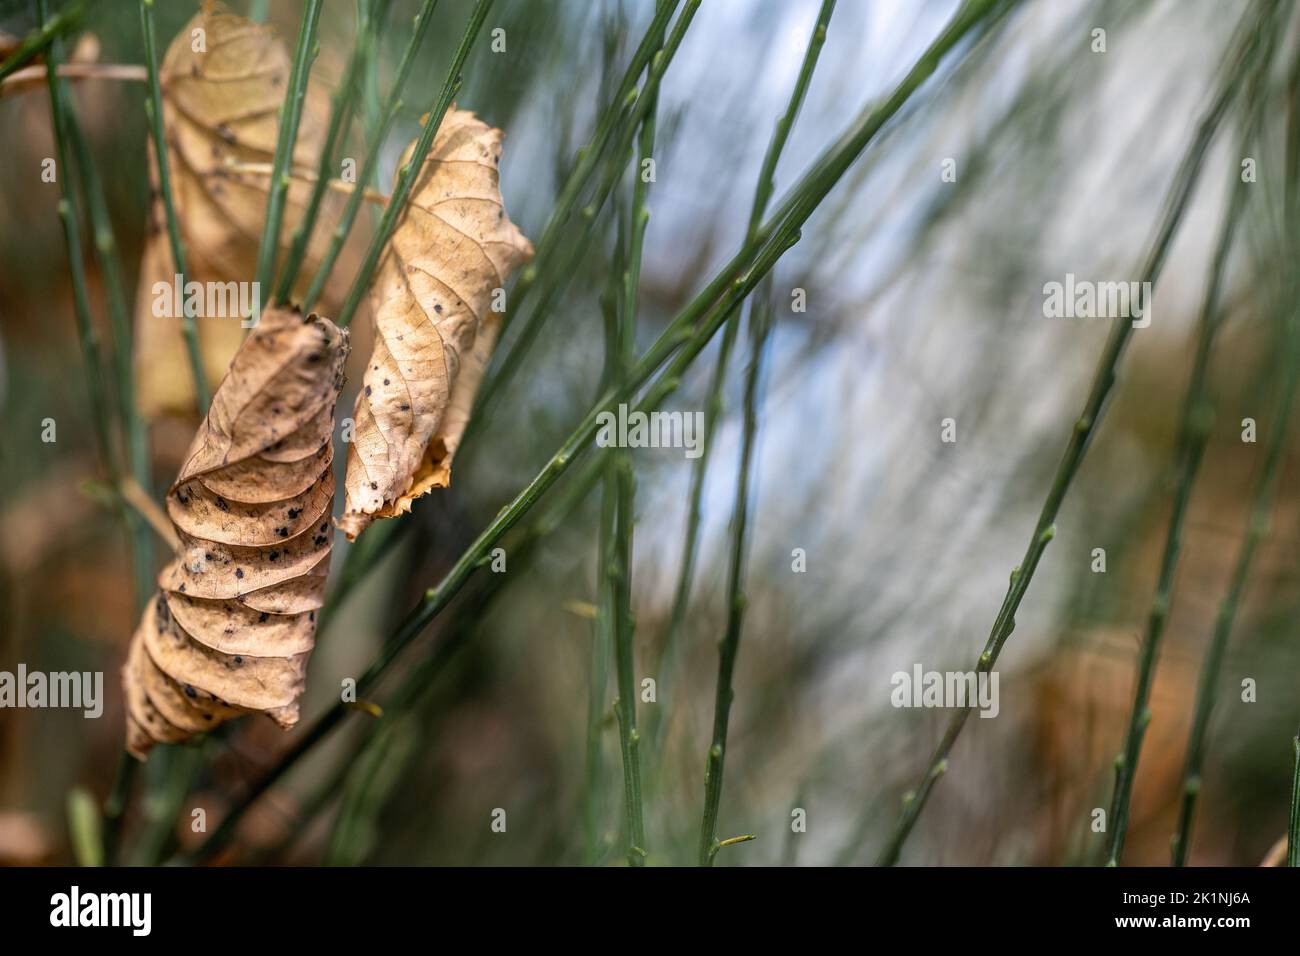 Wrinkled withered leaf wrapped around a grass straw during early fall in Sweden Stock Photo